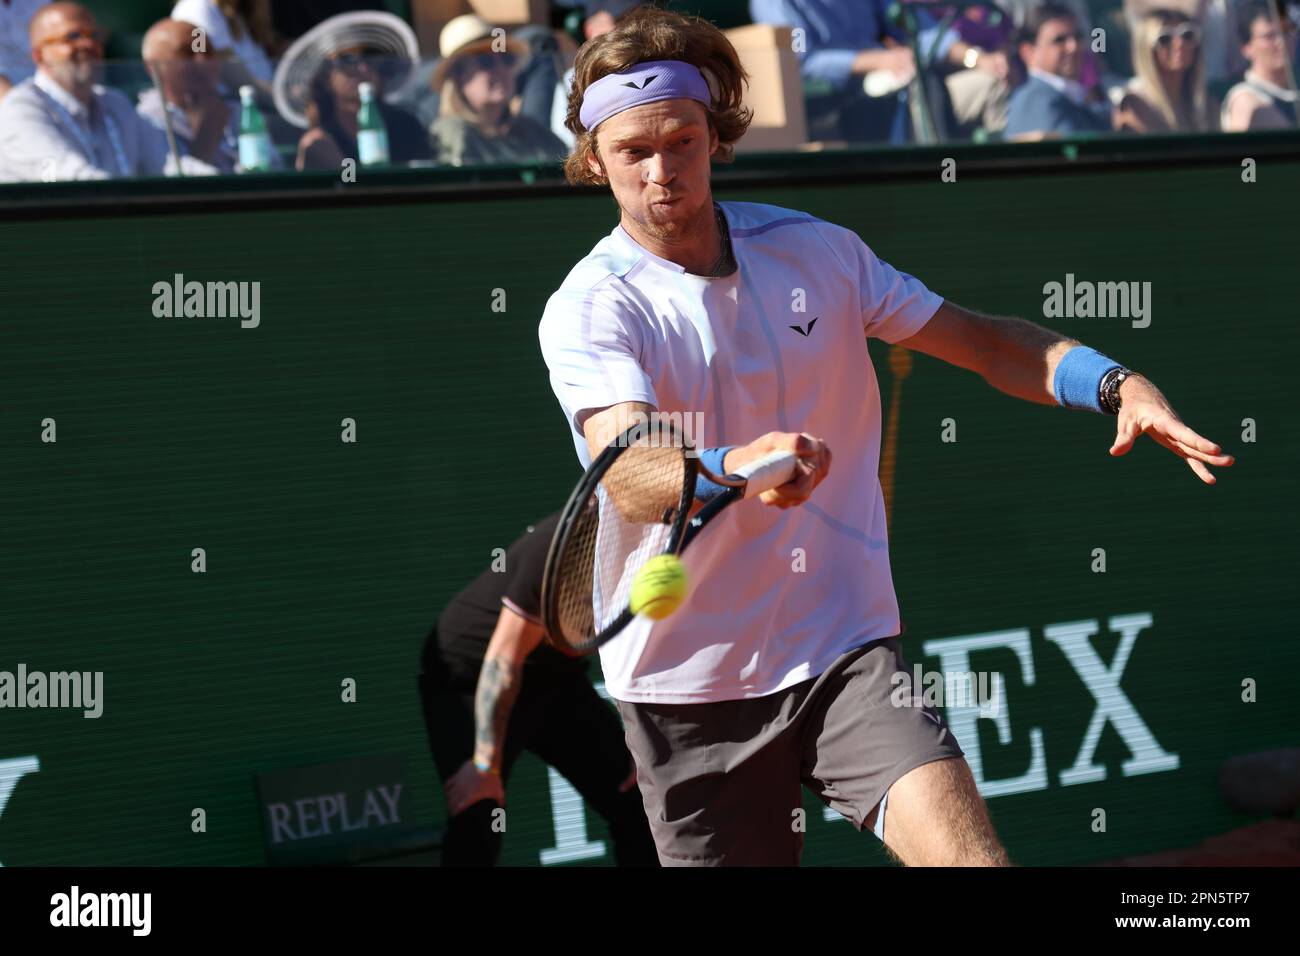 Monaco, Monaco. 17th Apr, 2023. MONACO, Monte Carlo, 16. April 2023; Holger Rune vs Andrey Rublev, Final Open Rolex Master 1000 Monte Carlo tennis tournament in the Monte Carlo Tennis Club on 16 April 2023, Andrey RUBLEV became match winner in this final - picture and copyright Thierry CARPICO/ATP images (CARPICO Thierry/ATP/SPP) Credit: SPP Sport Press Photo. /Alamy Live News Stock Photo